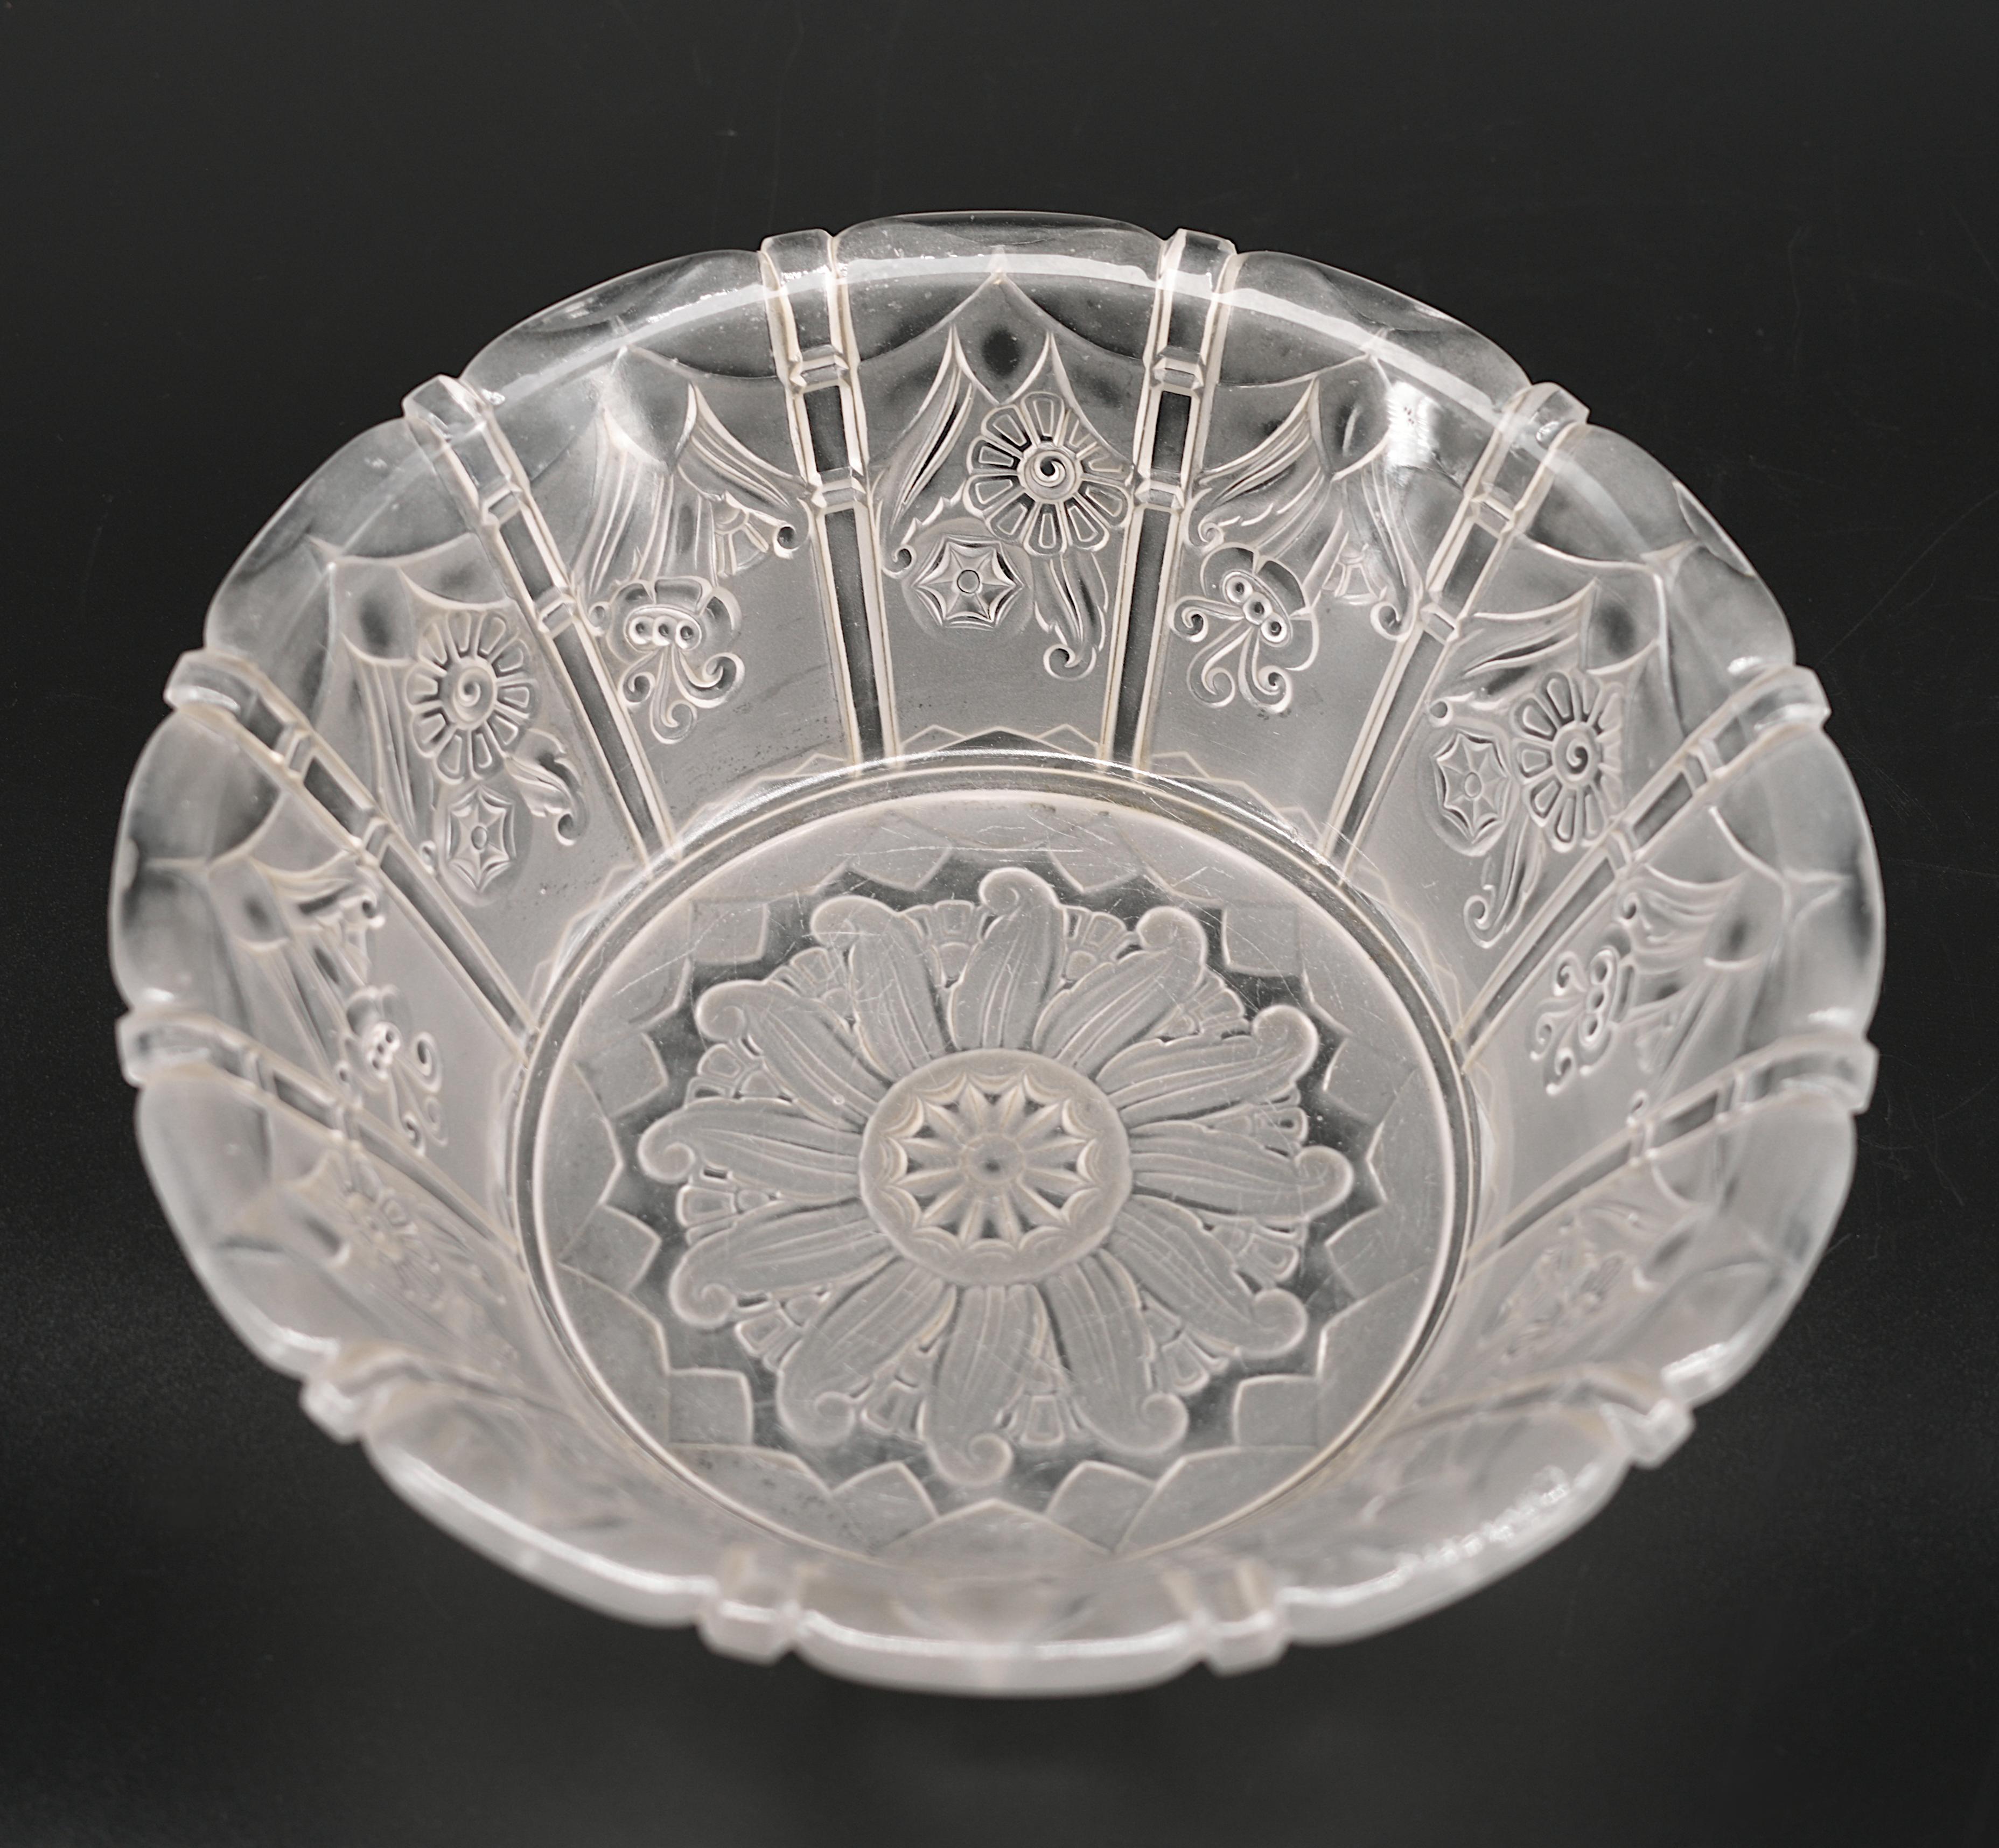 French Art Deco frosted molded glass fruit bowl by Pierre D'Avesn at DAUM's (Croismare), France, late 1920s. Centerpiece. Diameter : 11